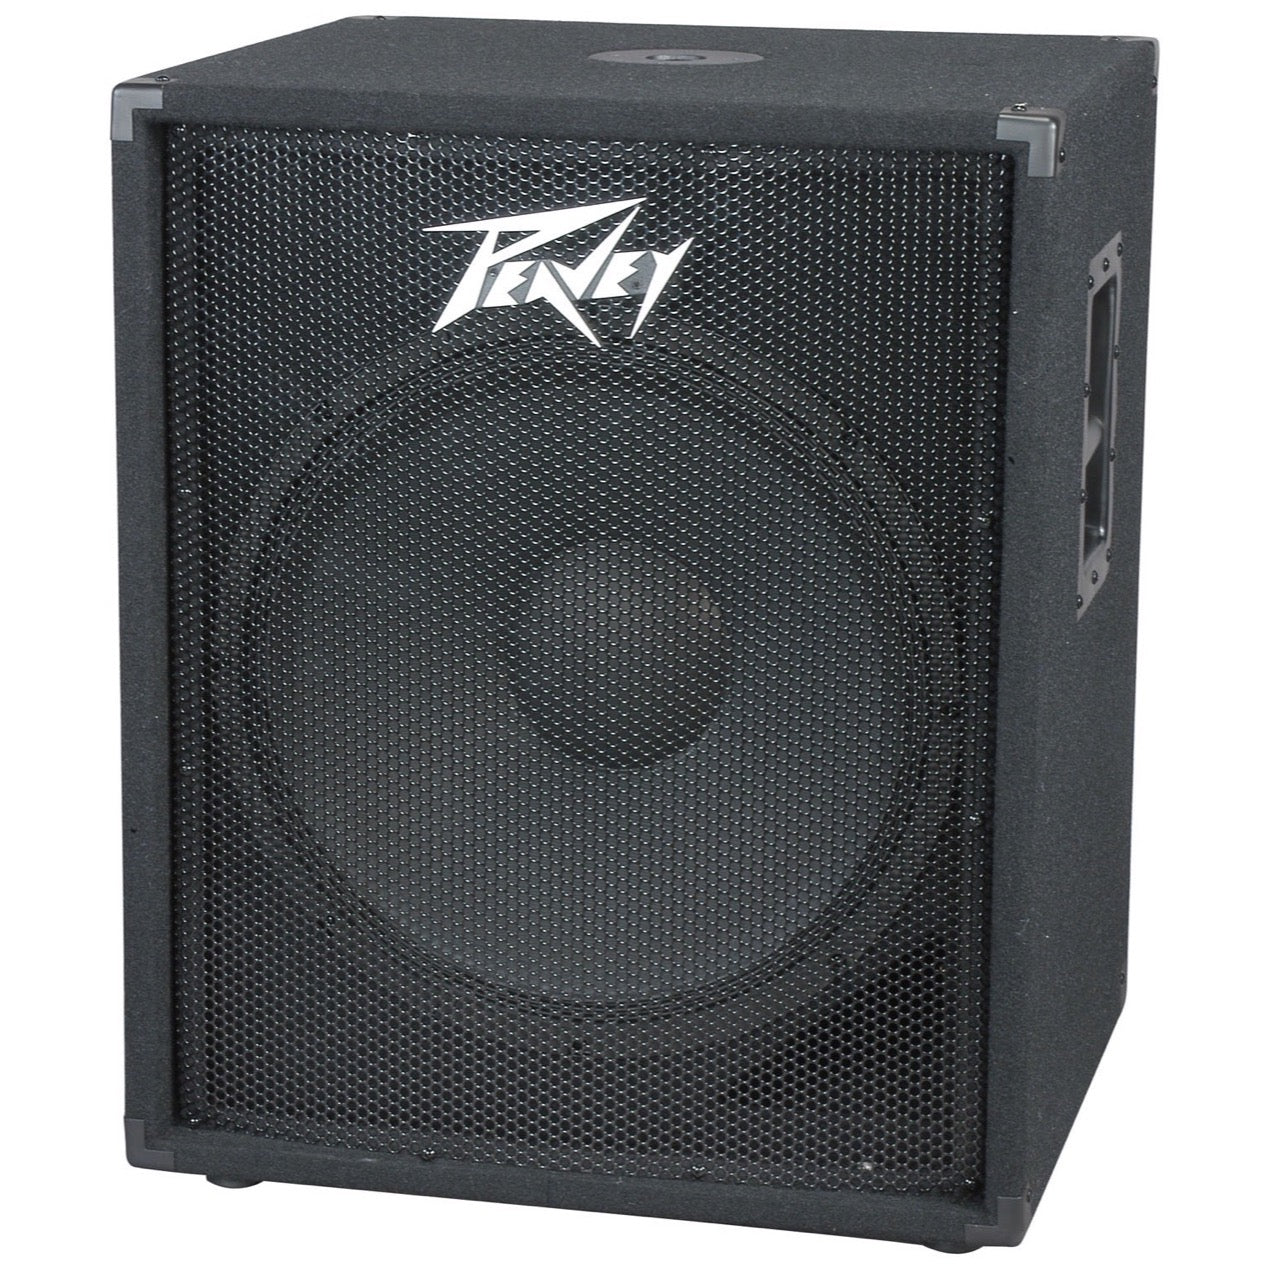 Peavey PV118 Passive, Unpowered Subwoofer (1x18 Inch), Pair